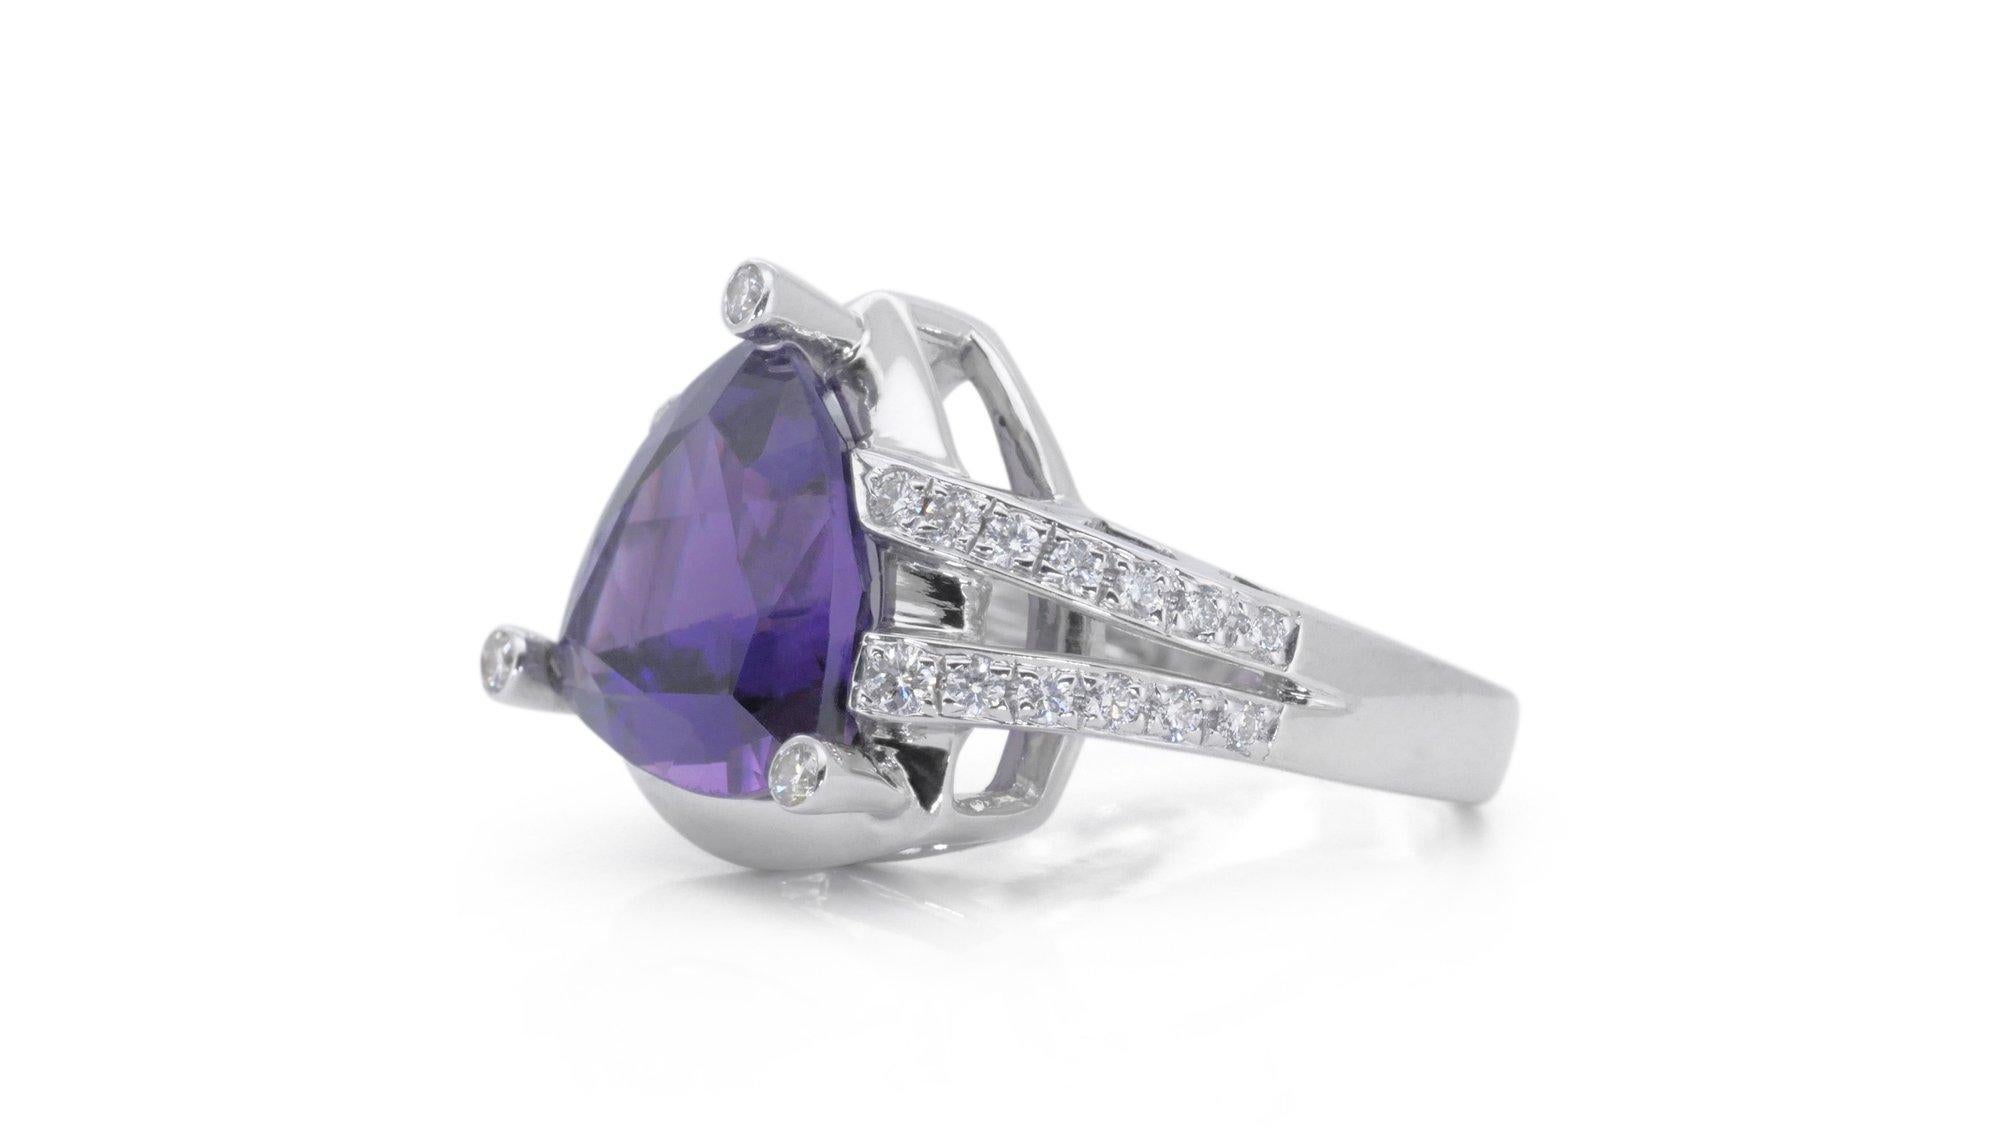 18k White Gold Split Shank Ring w/ 4.08ct Amethyst and Natural Diamonds IGI Cert In Excellent Condition For Sale In רמת גן, IL